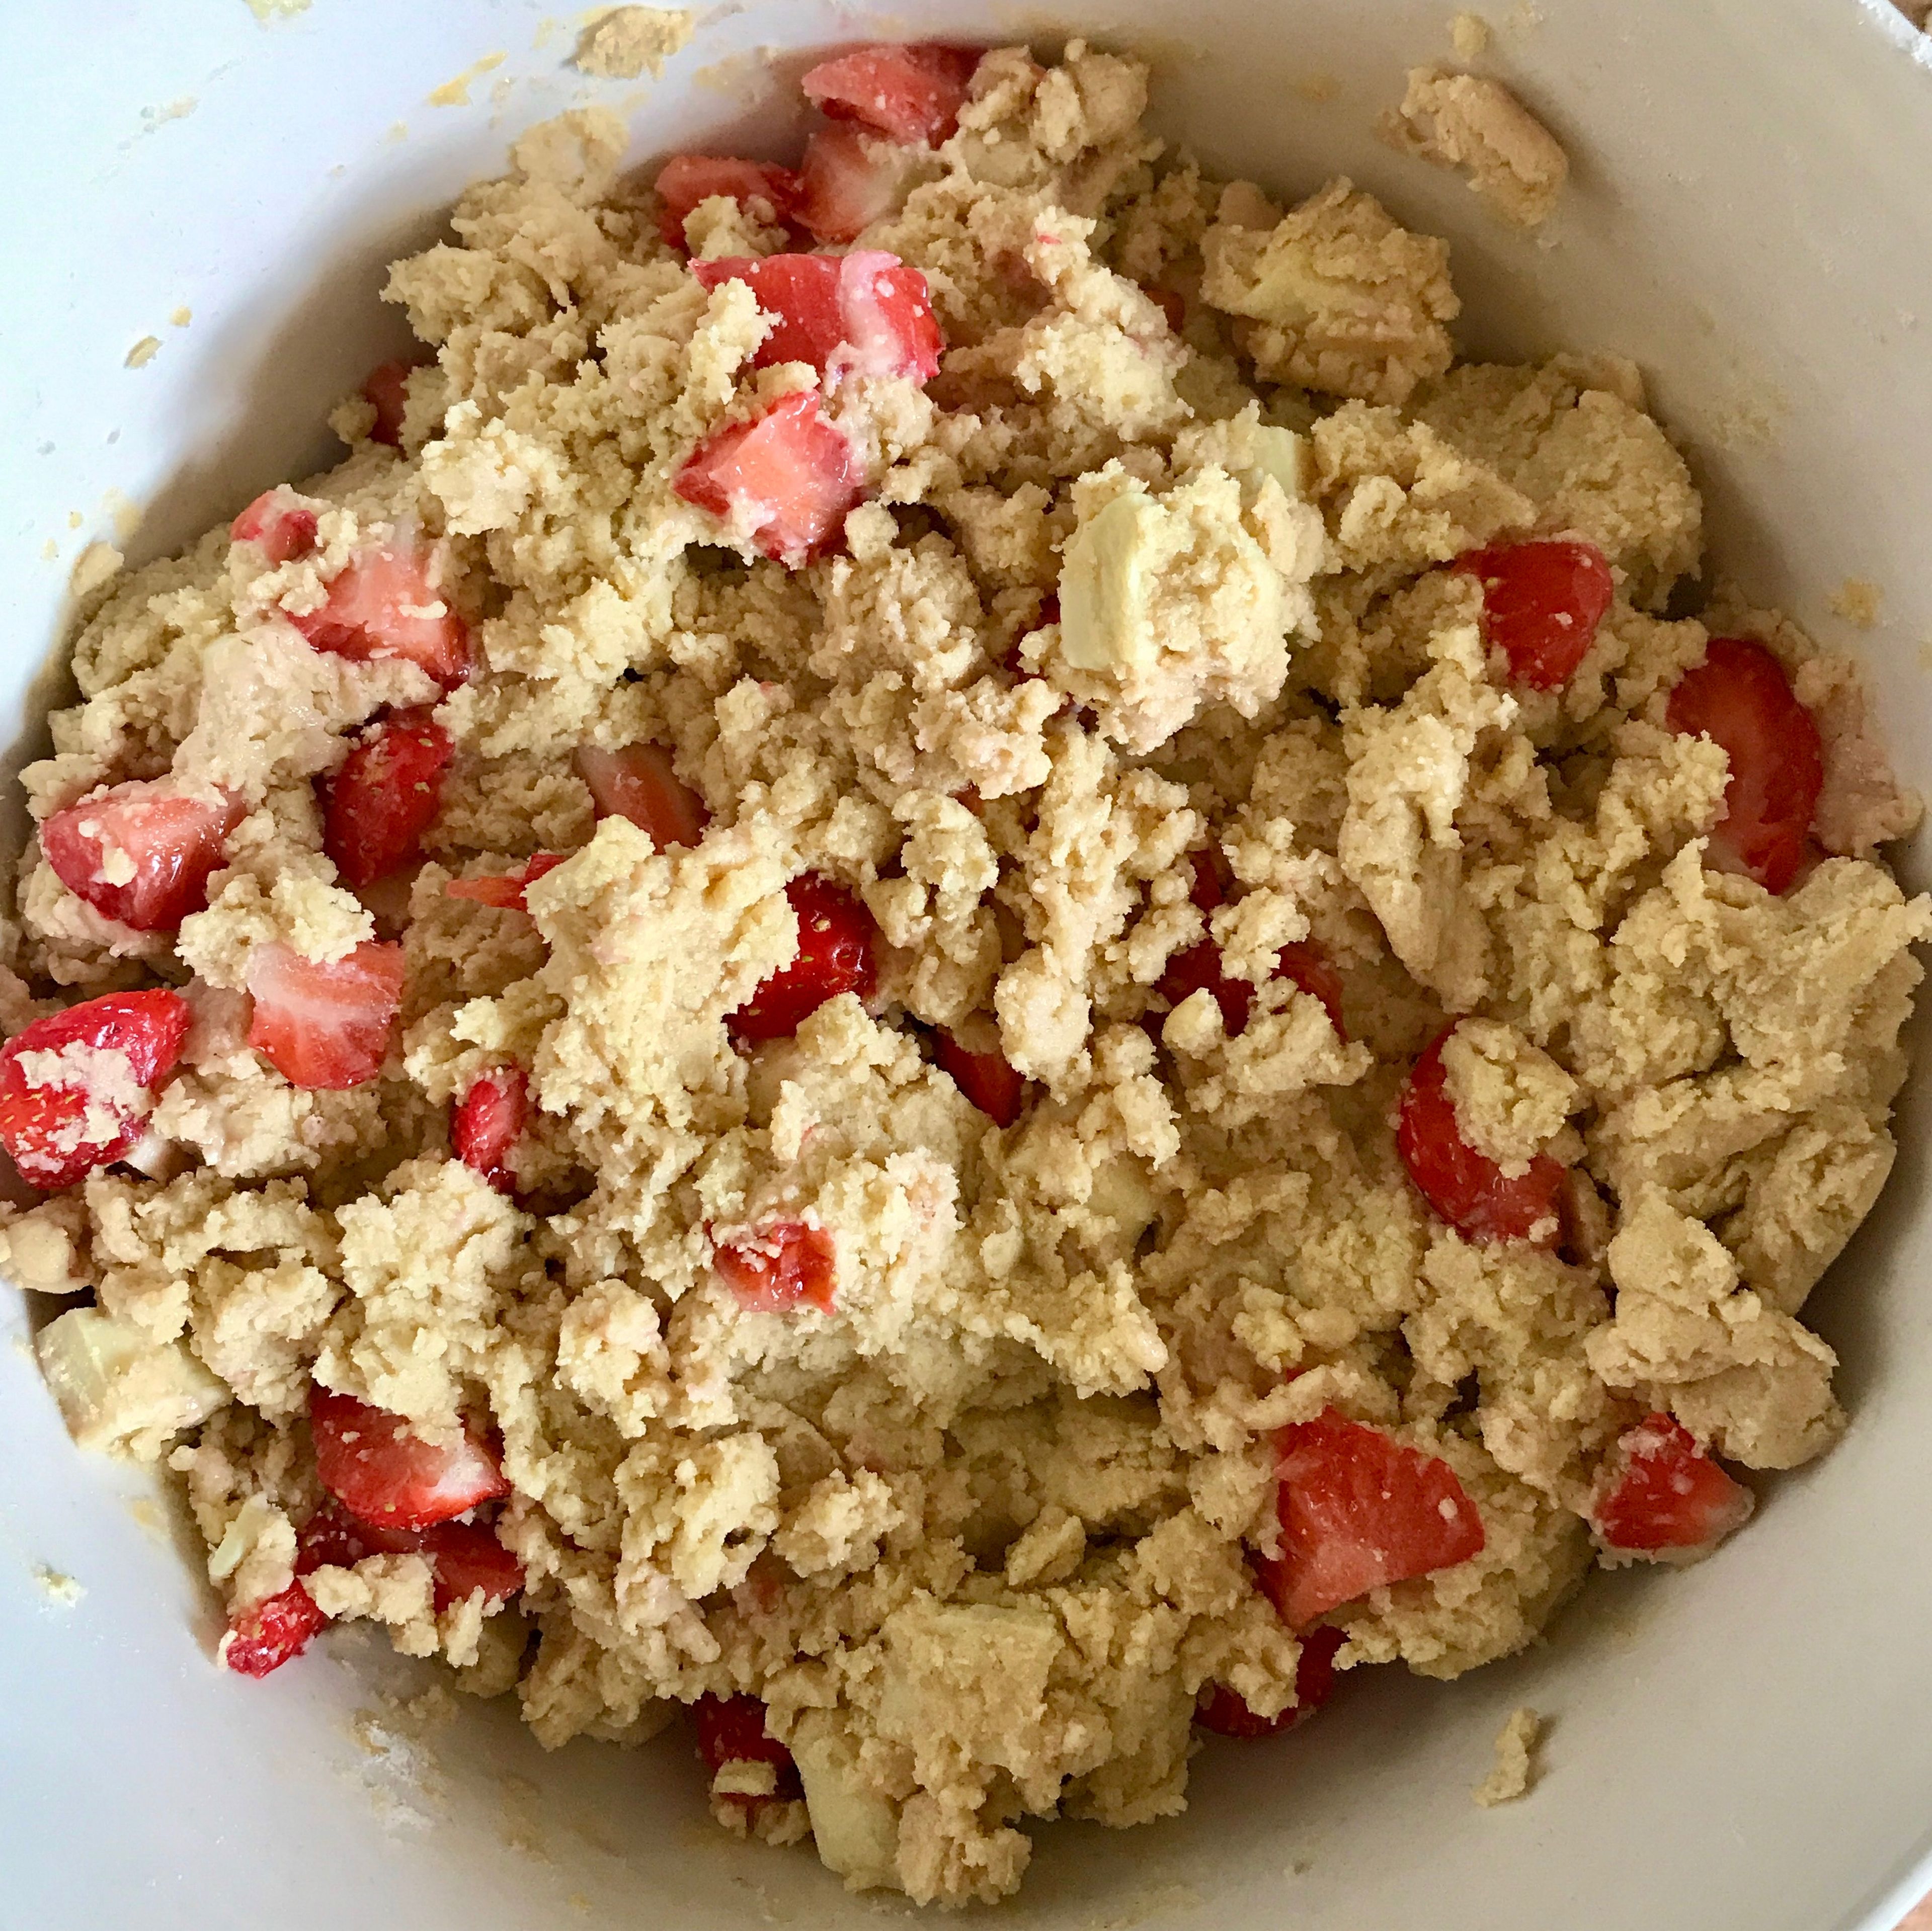 Chop the strawberries and white chocolate into roughly 1cm chunks and add to the dough. Mix through until evenly distributed.